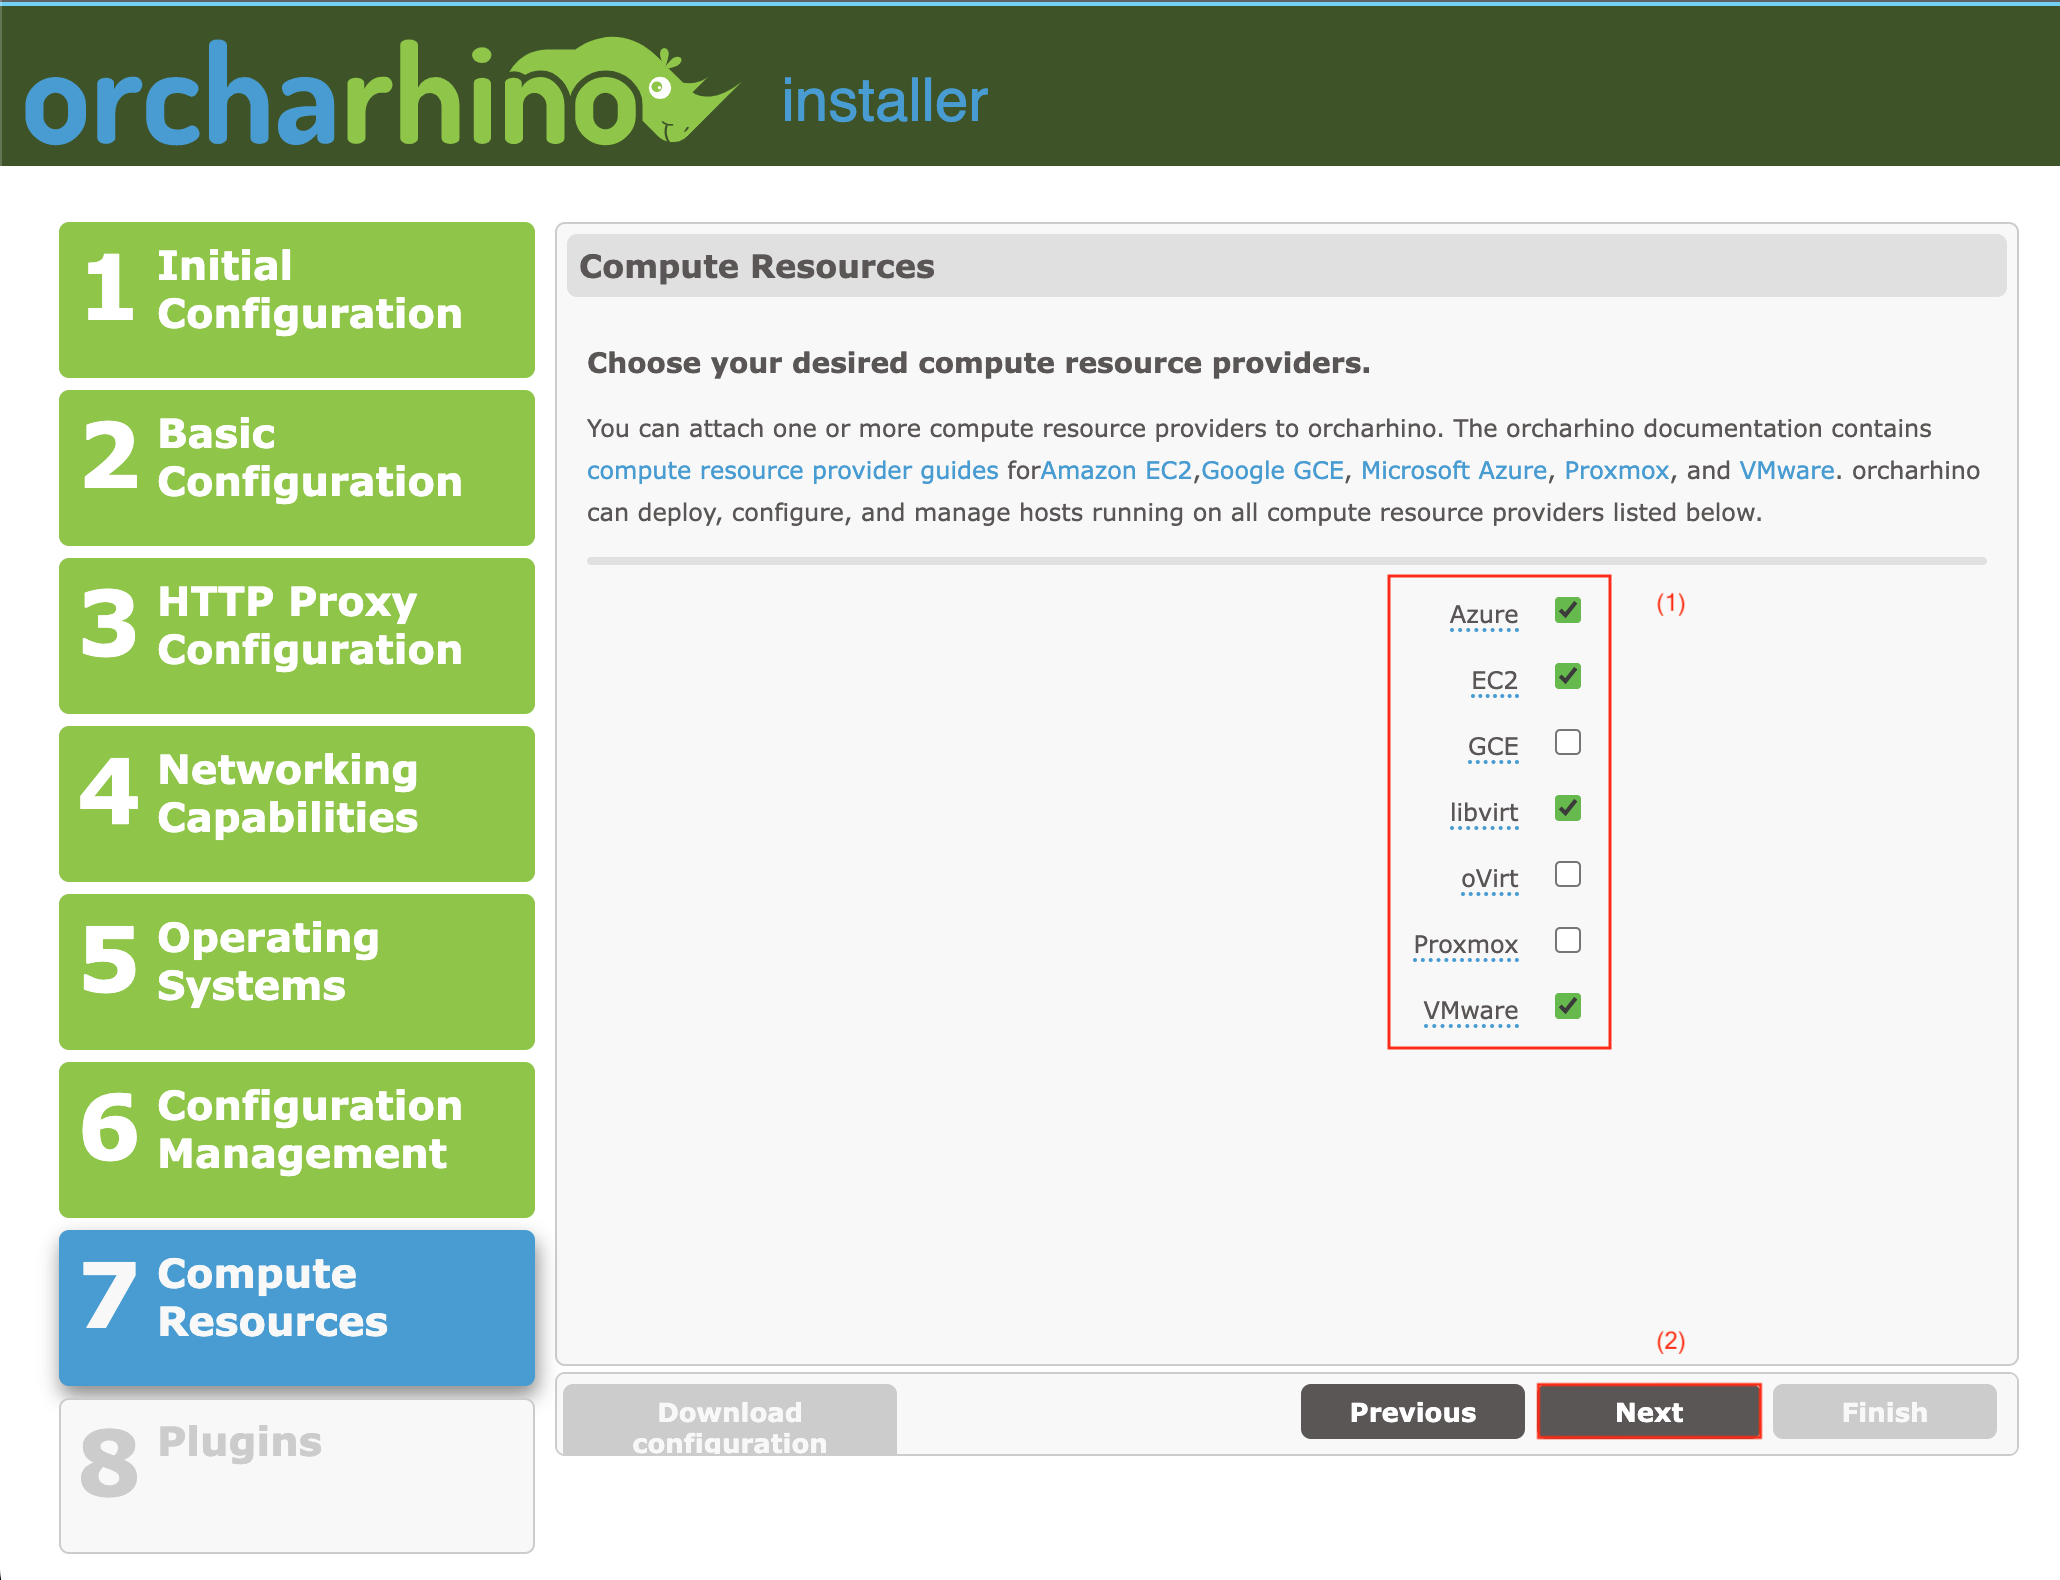 Selecting compute resources in orcharhino Installer GUI